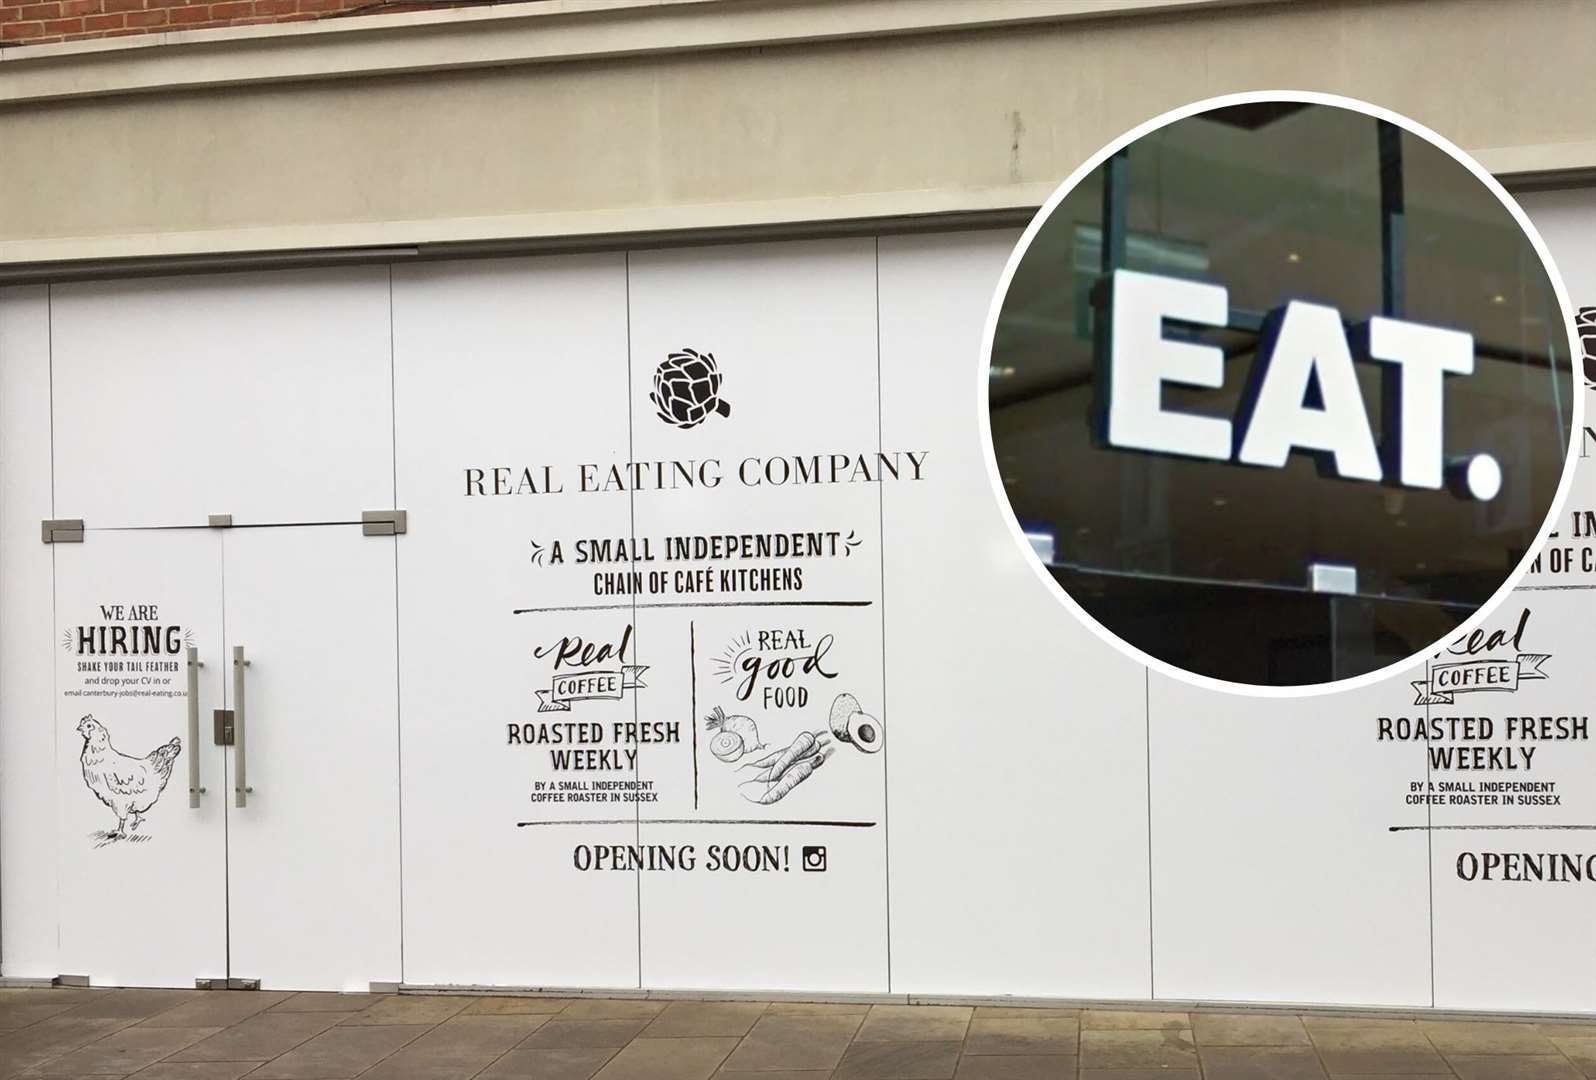 The Real Eating Company is set to replace Eat in Canterbury's Whitefriars